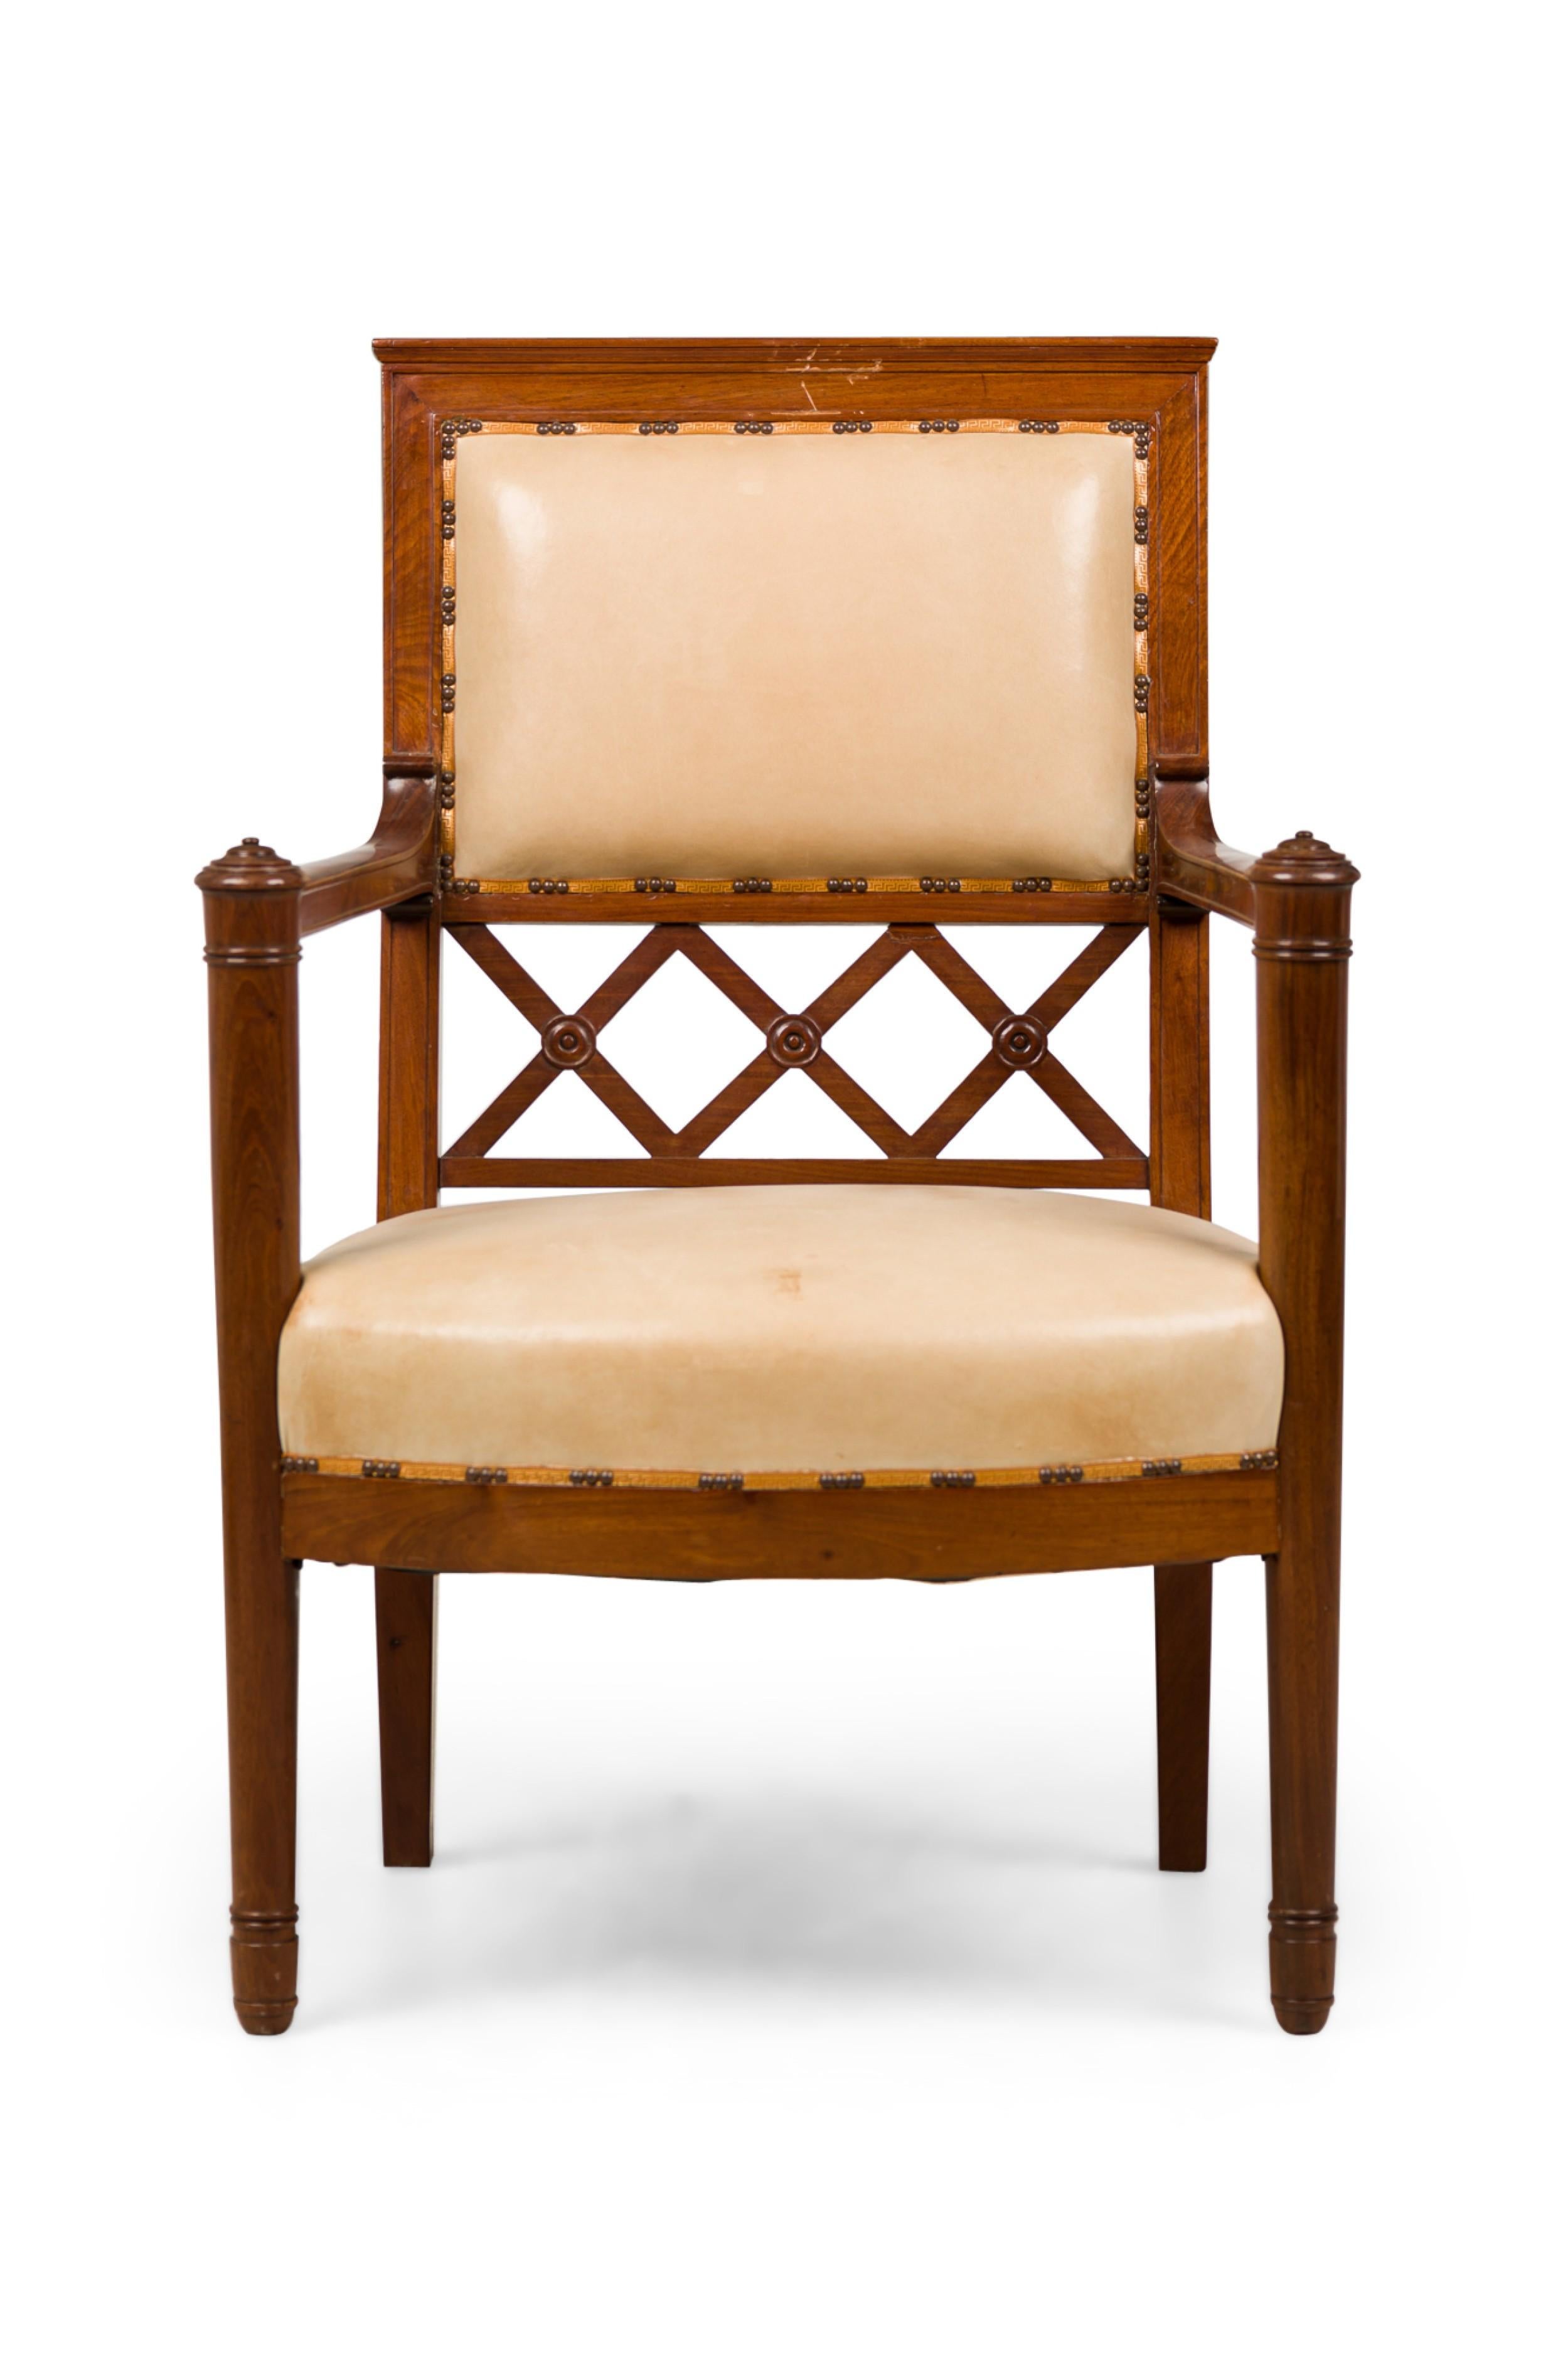 PAIR of French Consolate mahogany (circa 1800) open arm chairs with beige leather seat and square back with an open X design (PRICED AS PAIR)
